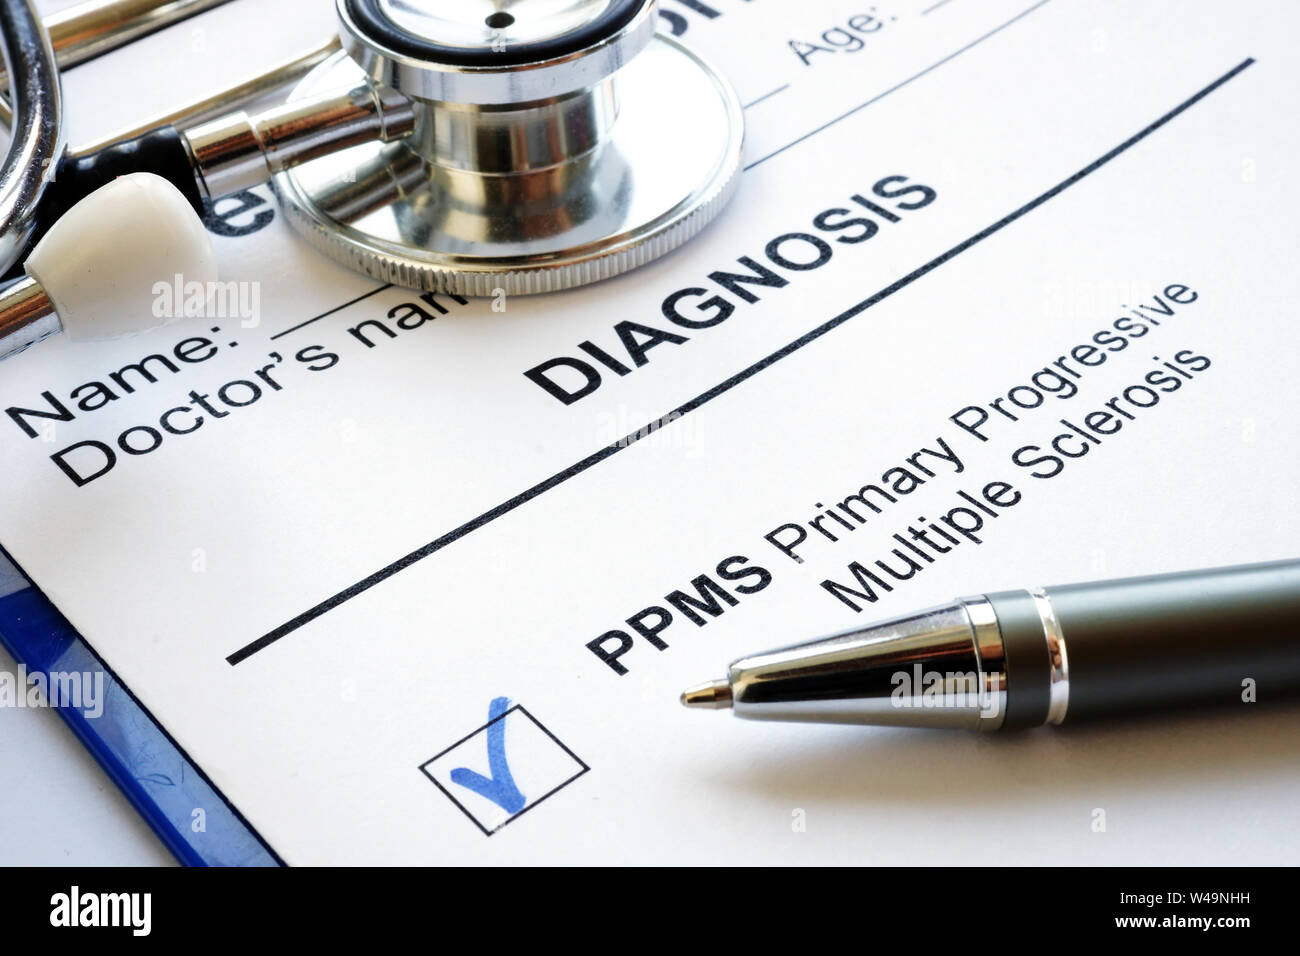 Medical form and diagnosis Primary progressive Multiple sclerosis PPMS. Stock Photo